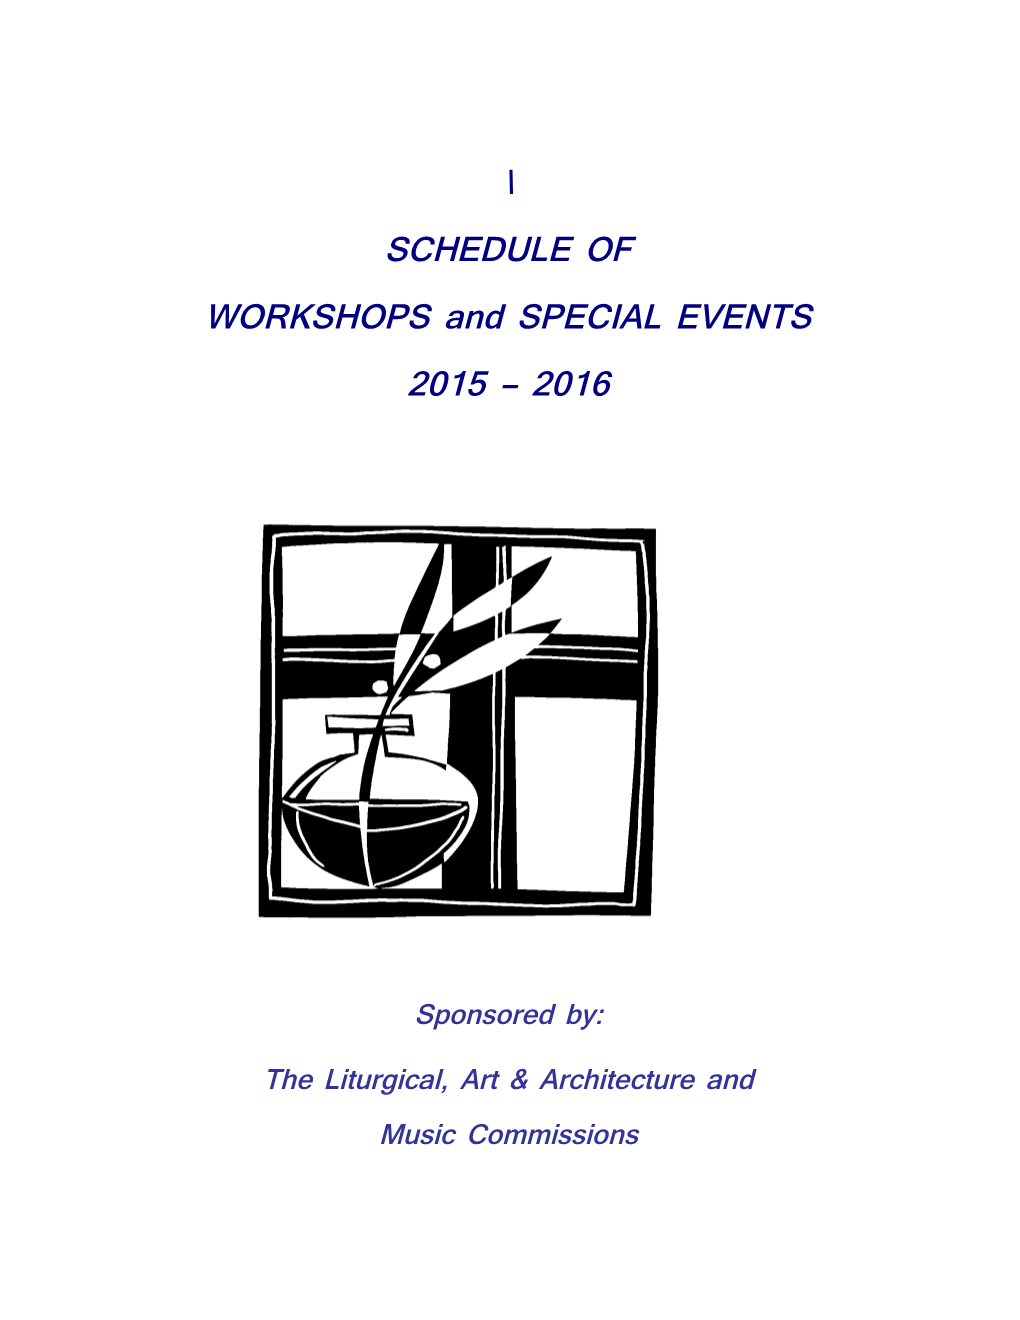 WORKSHOPS and SPECIAL EVENTS